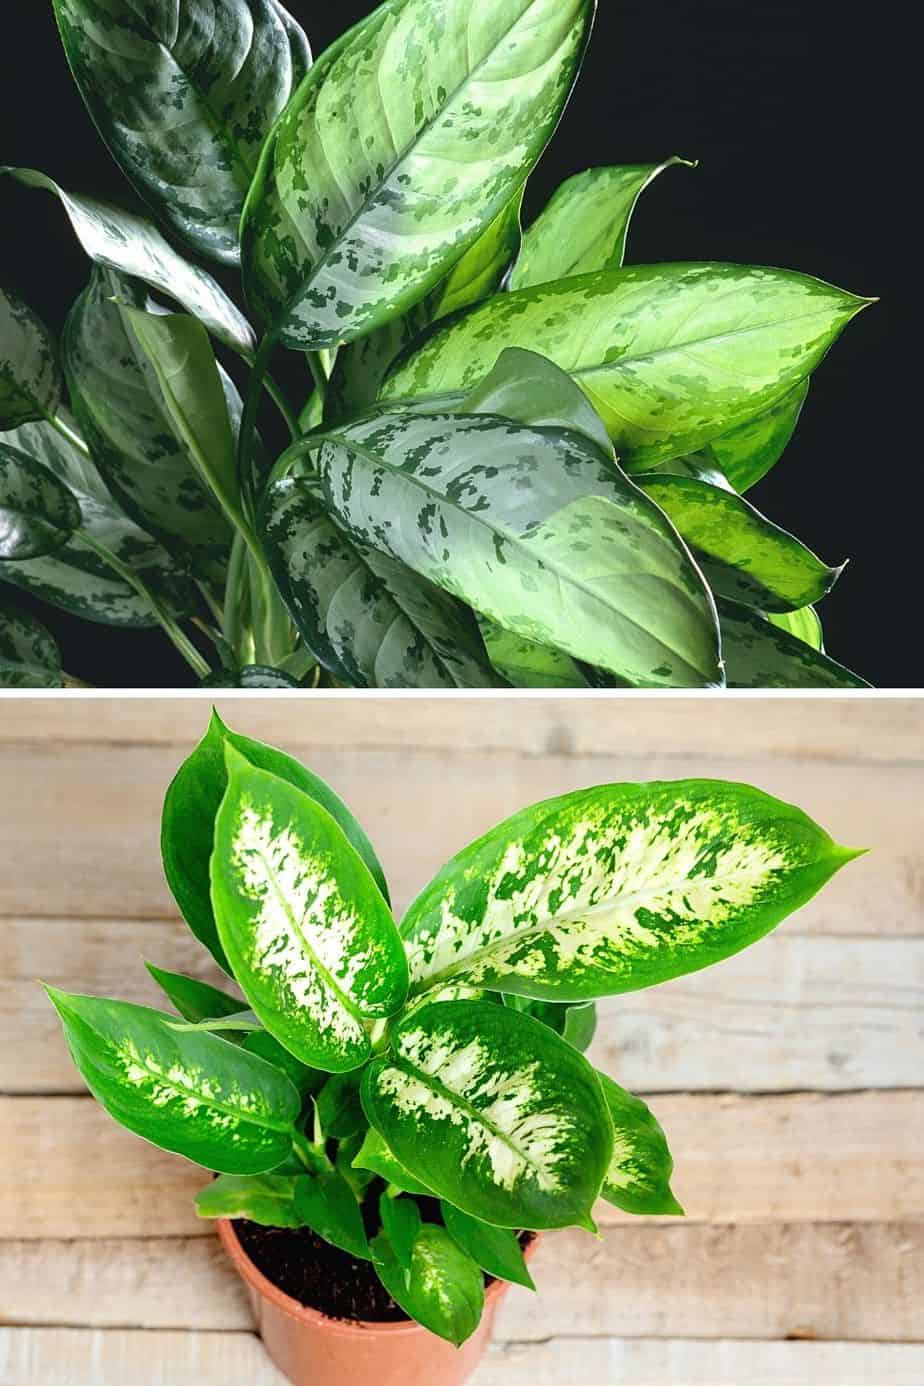 Chinese Evergreen and Dumbcane can be grown from cuttings, making sure to place them in transparent vases with aquarium rocks